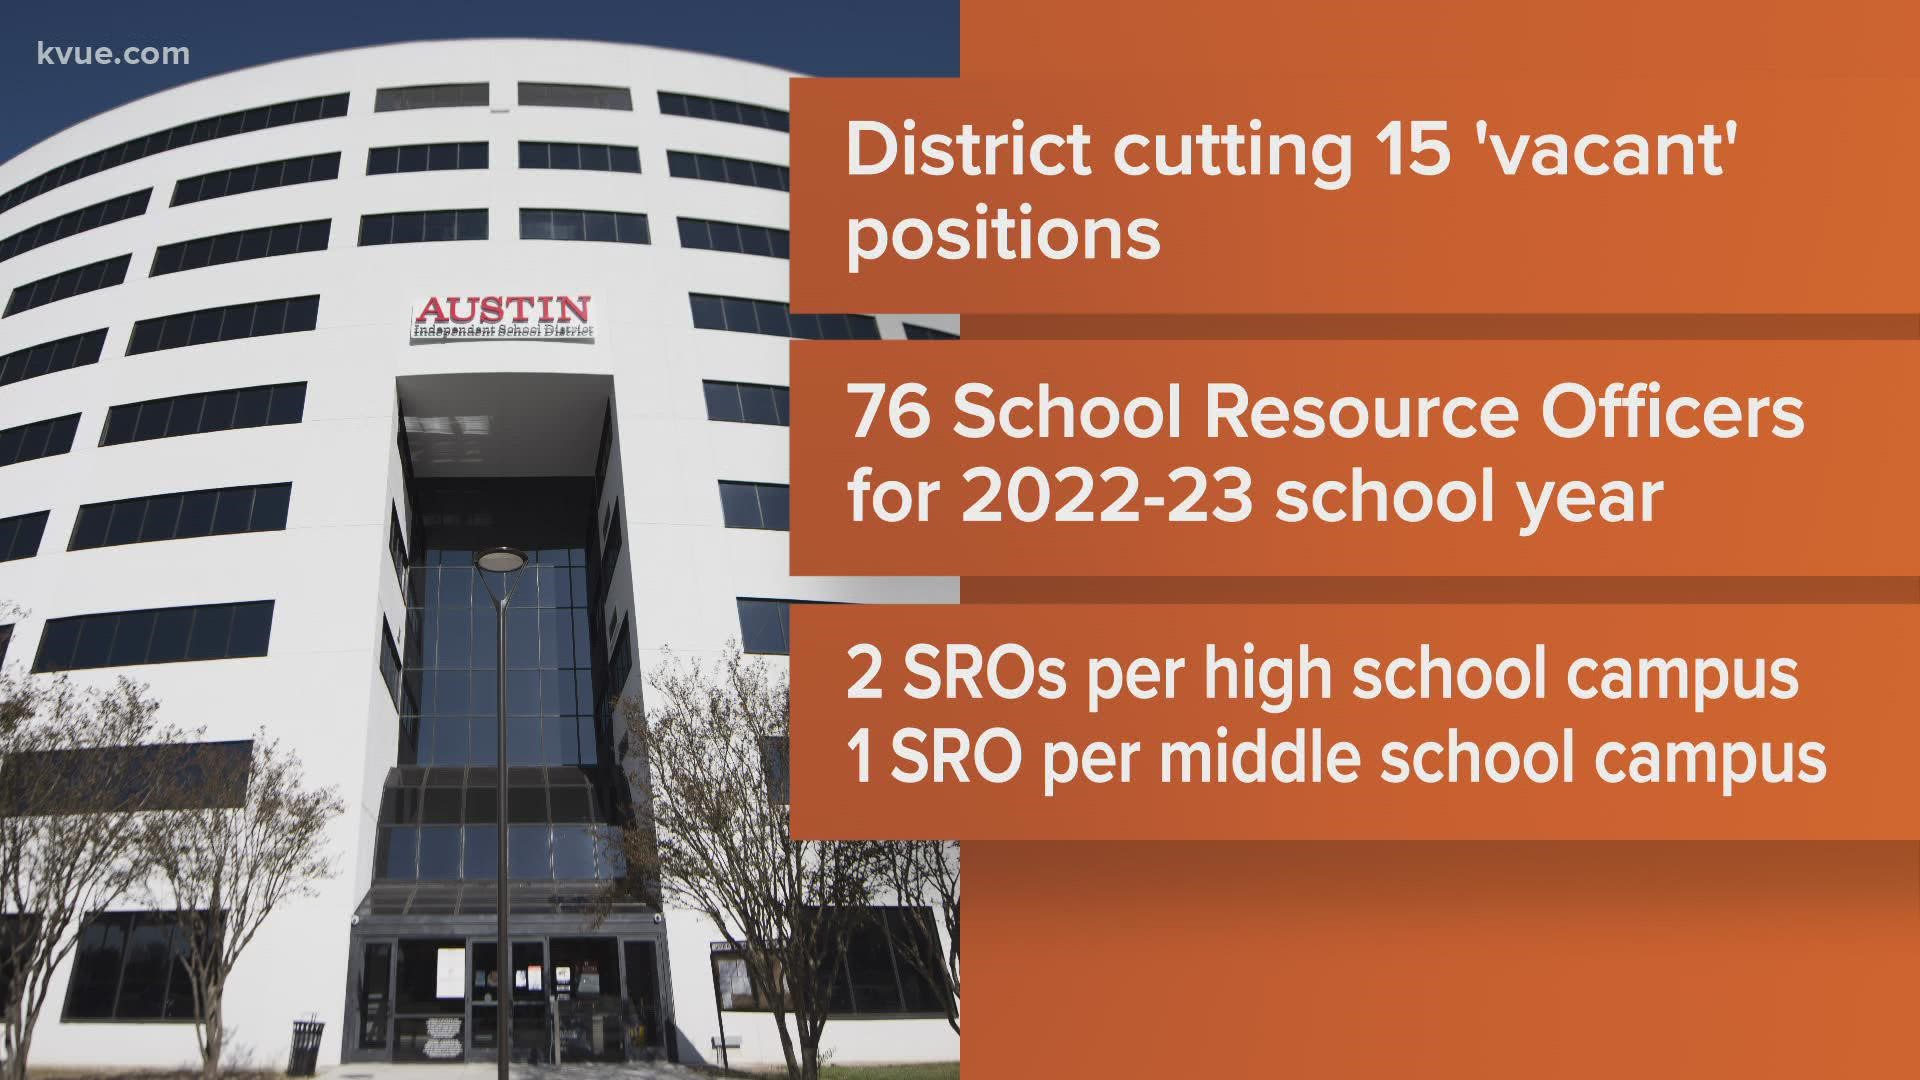 Austin ISD is cutting 15 police officer positions as a part of staff reductions.